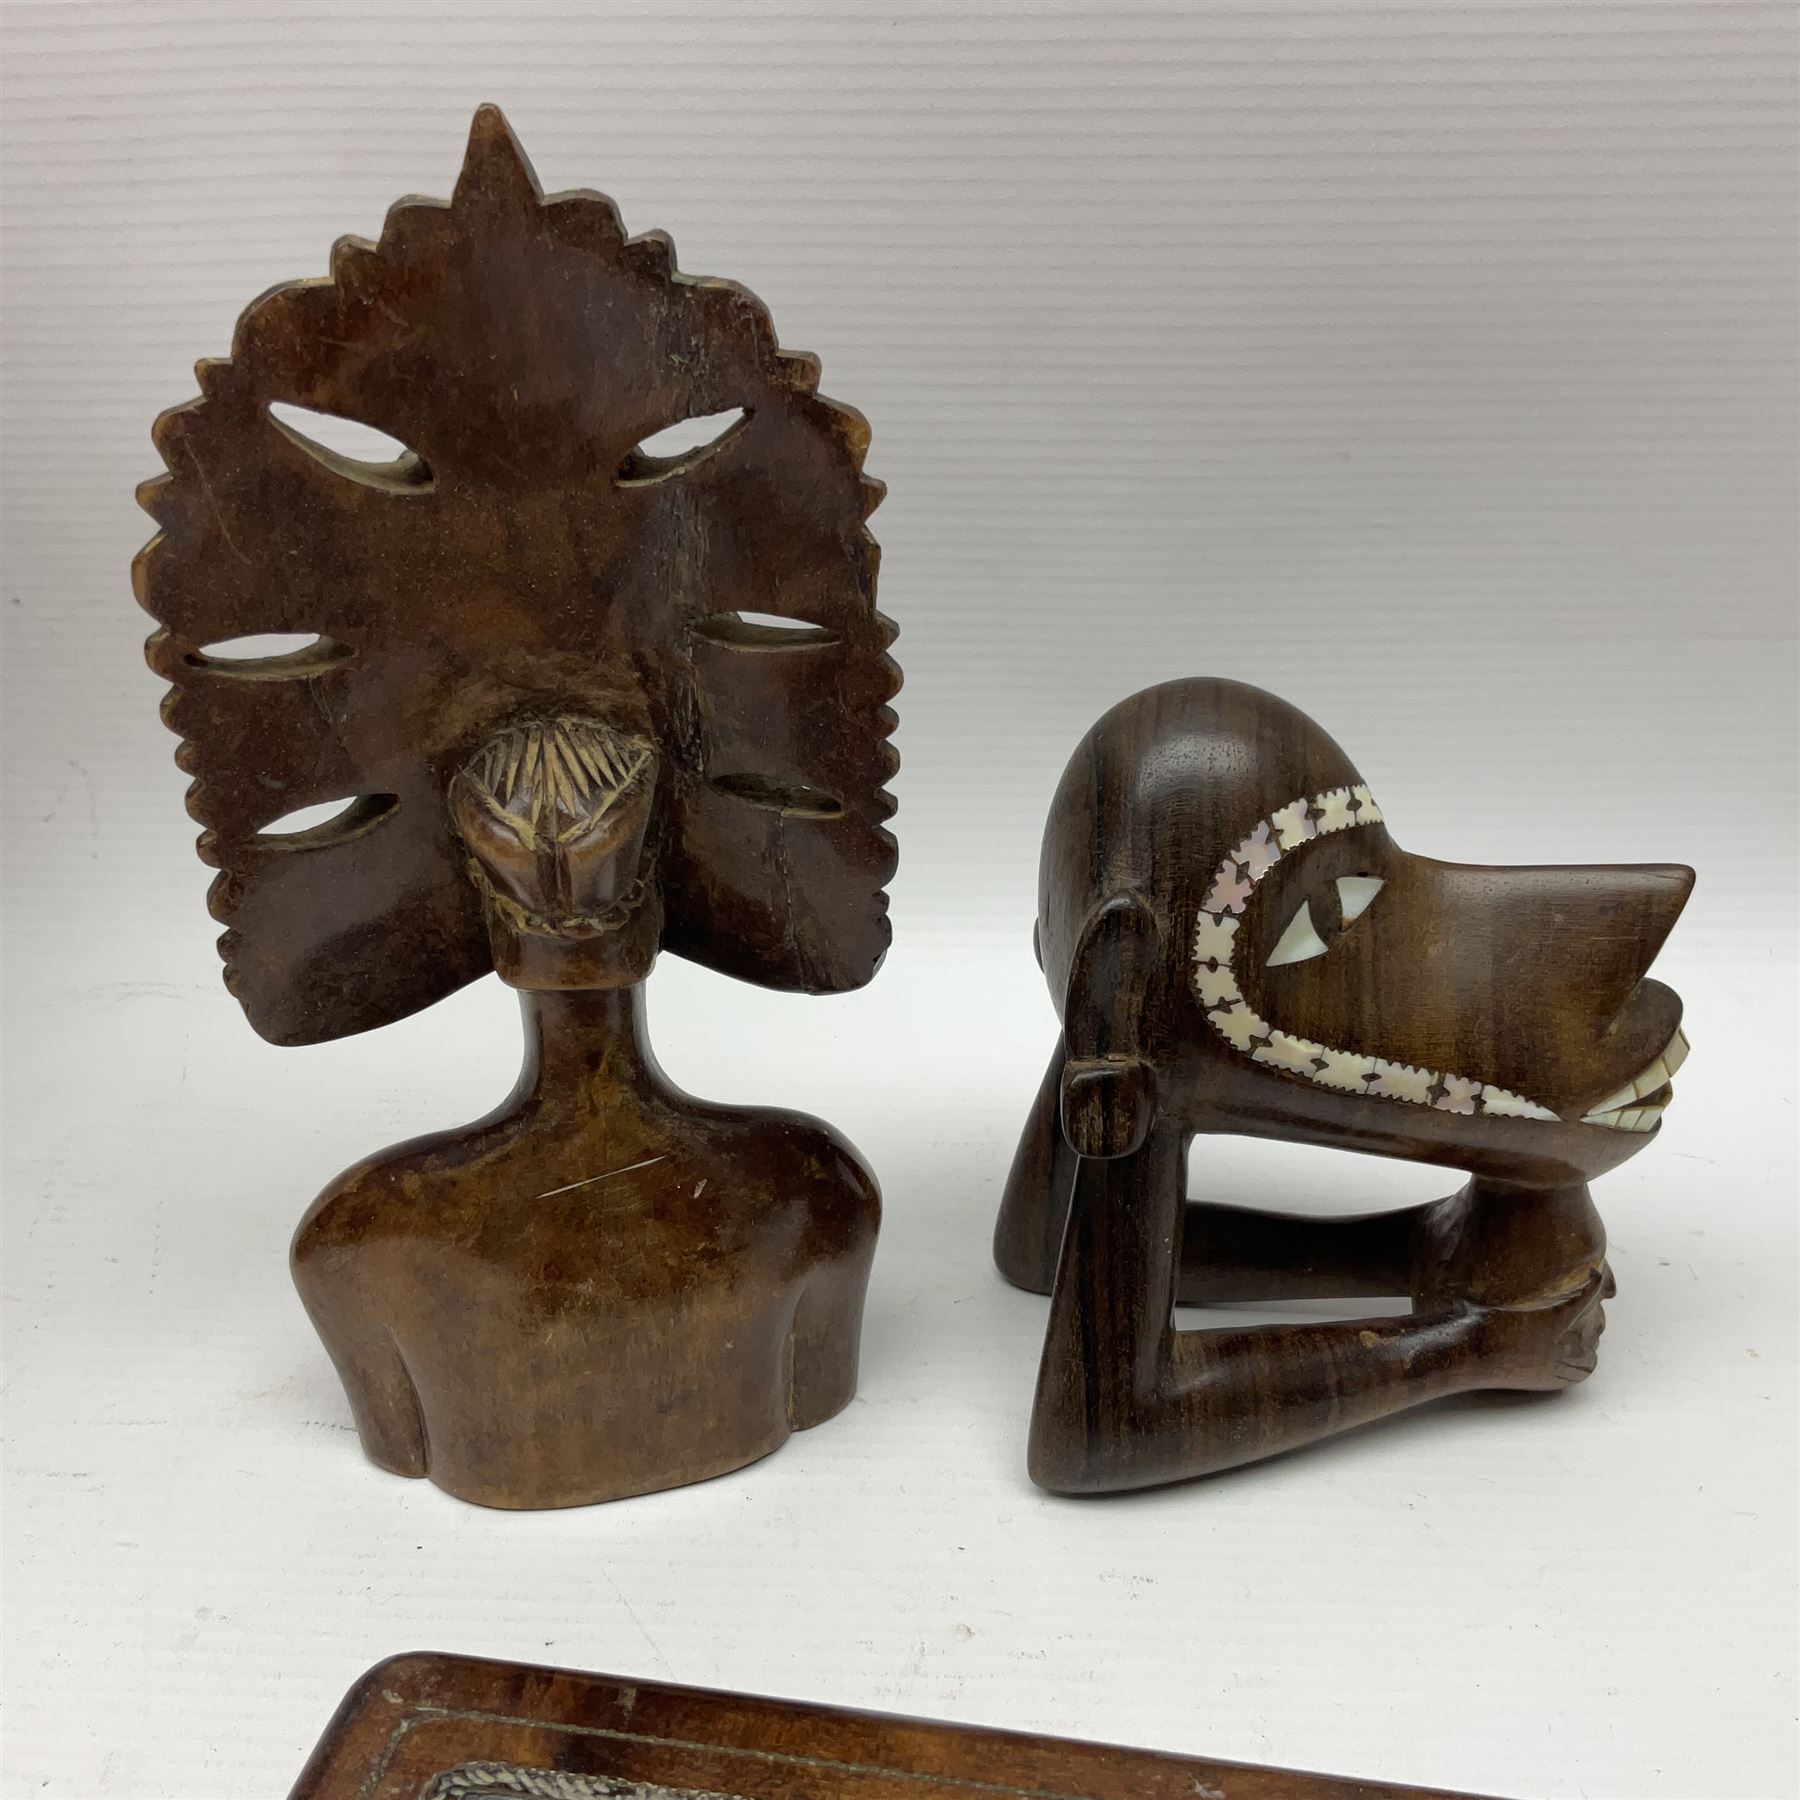 20th century wooden carvings from the Solomon Islands - Image 7 of 10